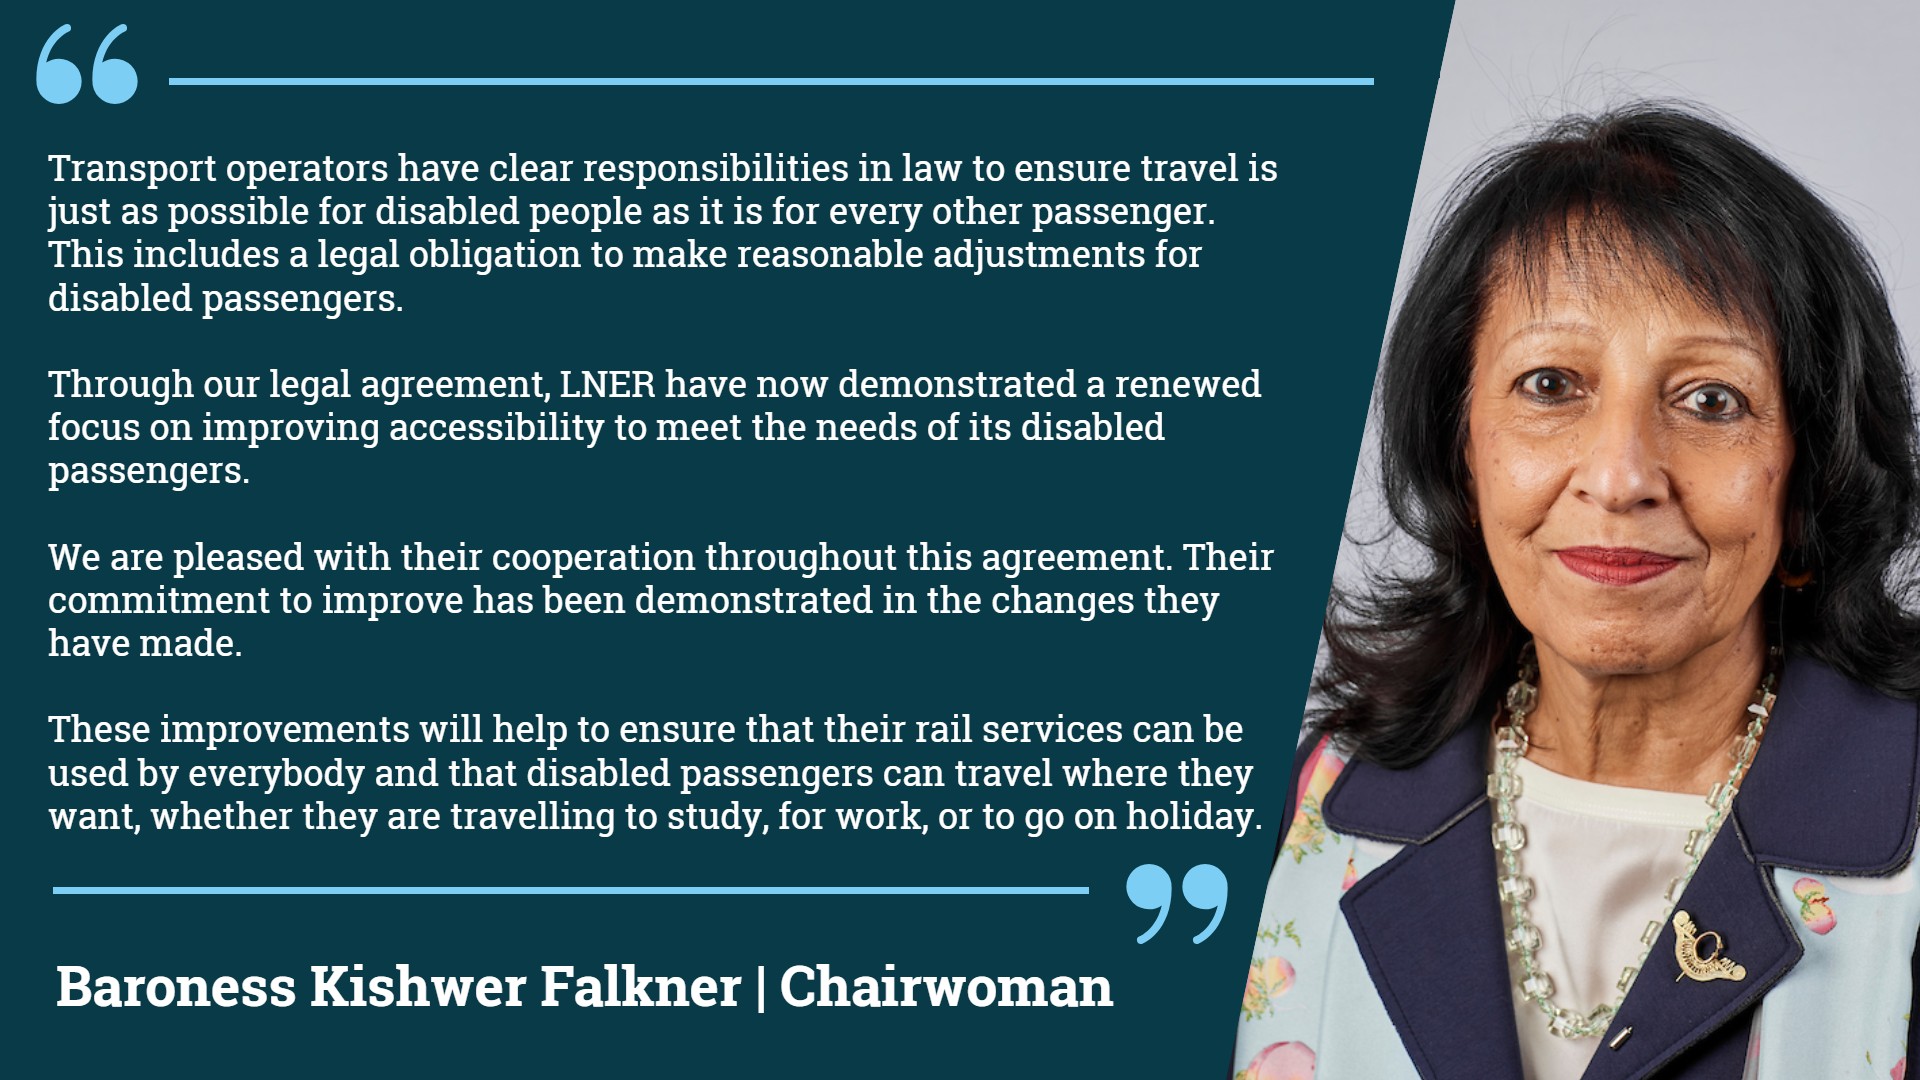 Statement from EHRC Chairwoman Baroness Kishwer Falkner, "Transport operators have clear responsibilities in law to ensure travel is just as possible for disabled people as it is for every other passenger. This includes a legal obligation to make reasonable adjustments for disabled passengers. Through our legal agreement, LNER have now demonstrated a renewed focus on improving accessibility to meet the needs of its disabled passengers. We are pleased with their cooperation throughout this agreement. Their commitment to improve has been demonstrated in the changes they have made. These improvements will help to ensure that their rail services can be used by everybody and that disabled passengers can travel where they want, whether they are travelling to study, for work, or to go on holiday".